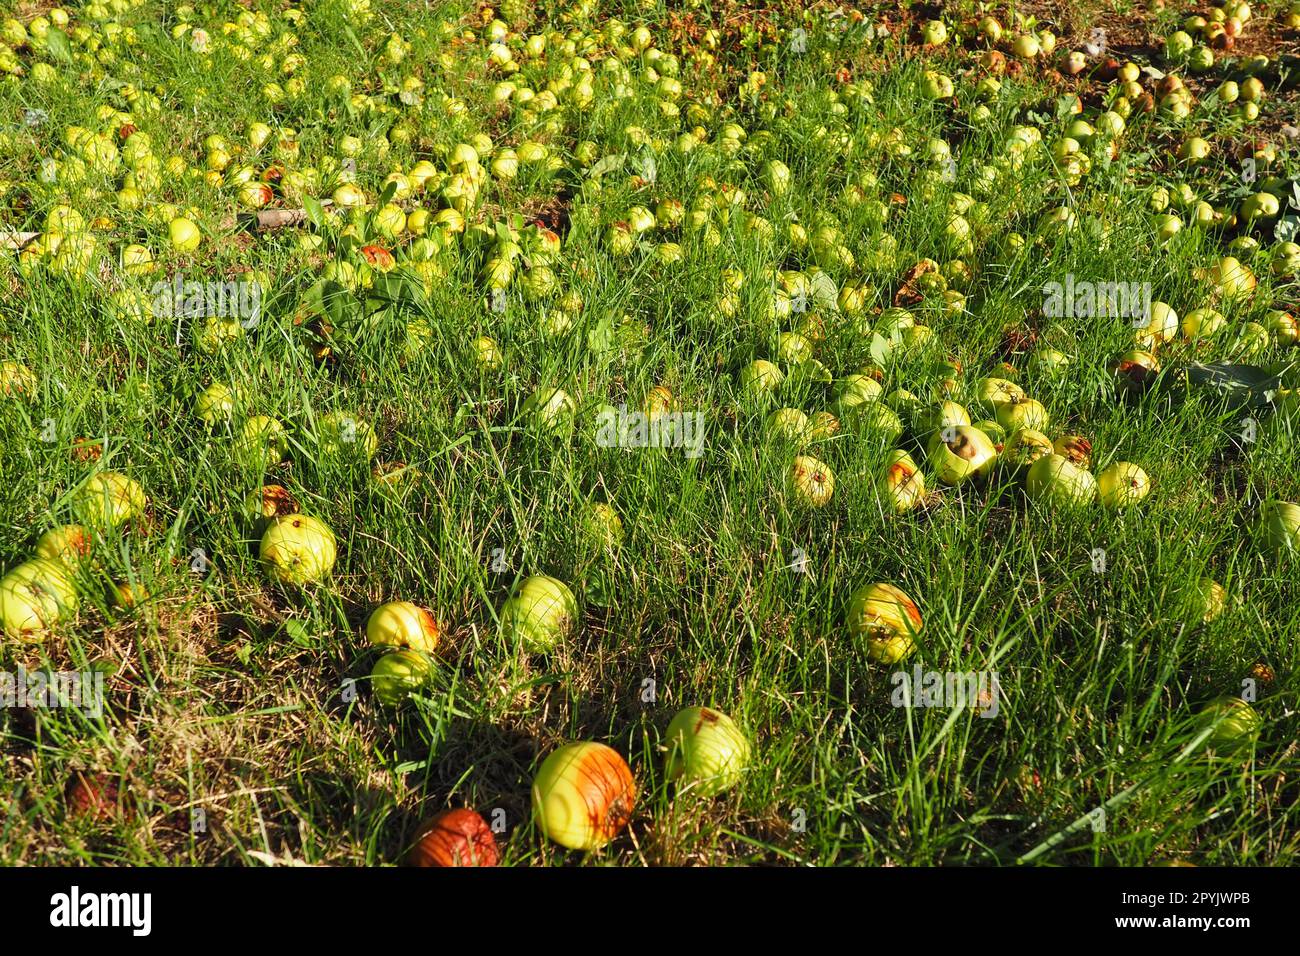 Yellow - green fallen apples lie on the grass under the apple tree. Yield loss and fruit rot. Serbian agriculture and horticulture. Stock Photo